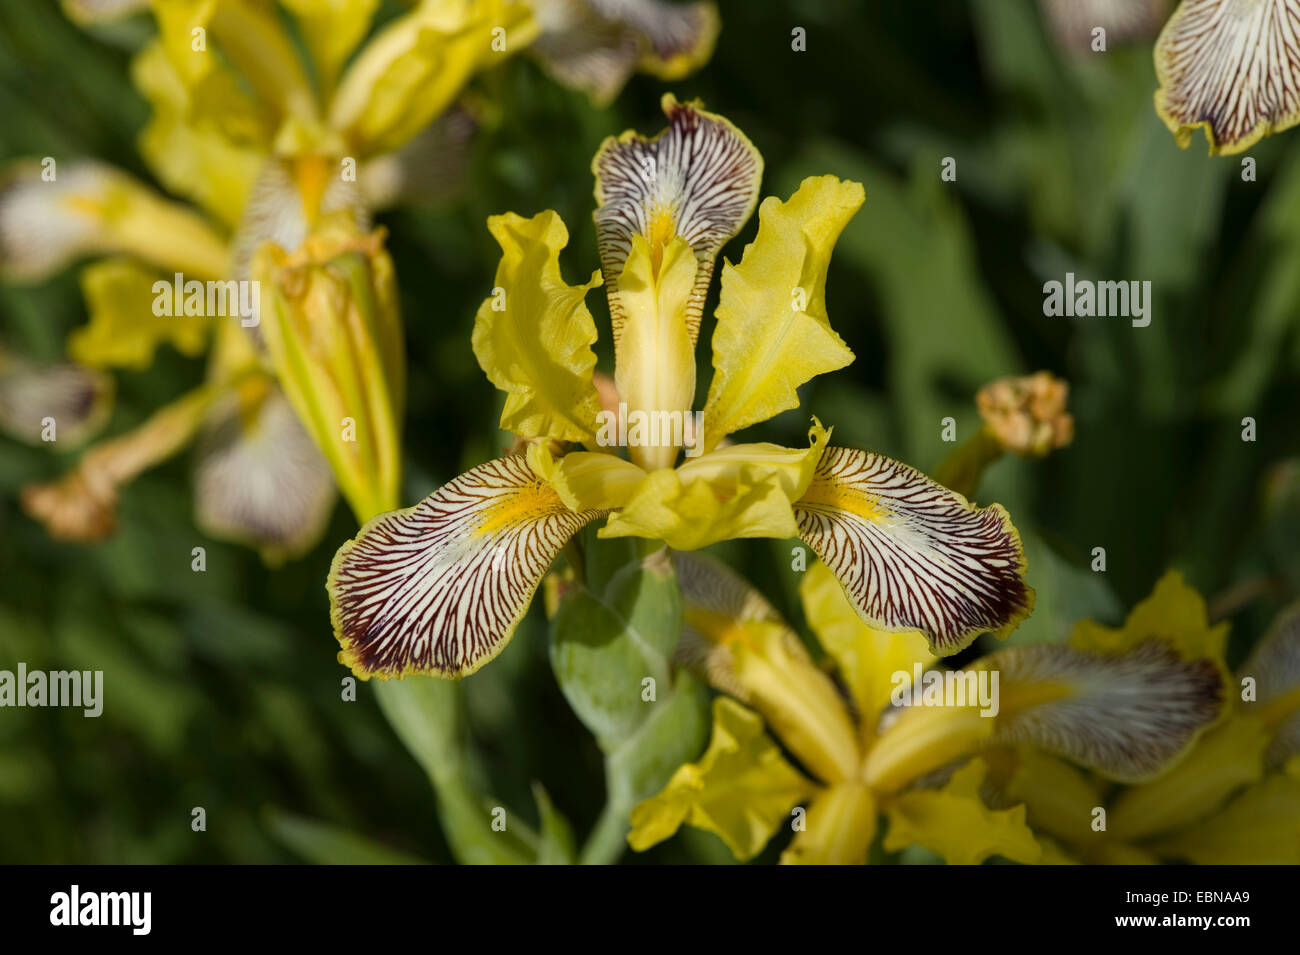 Variegated Iris High Resolution Stock Photography and Images - Alamy